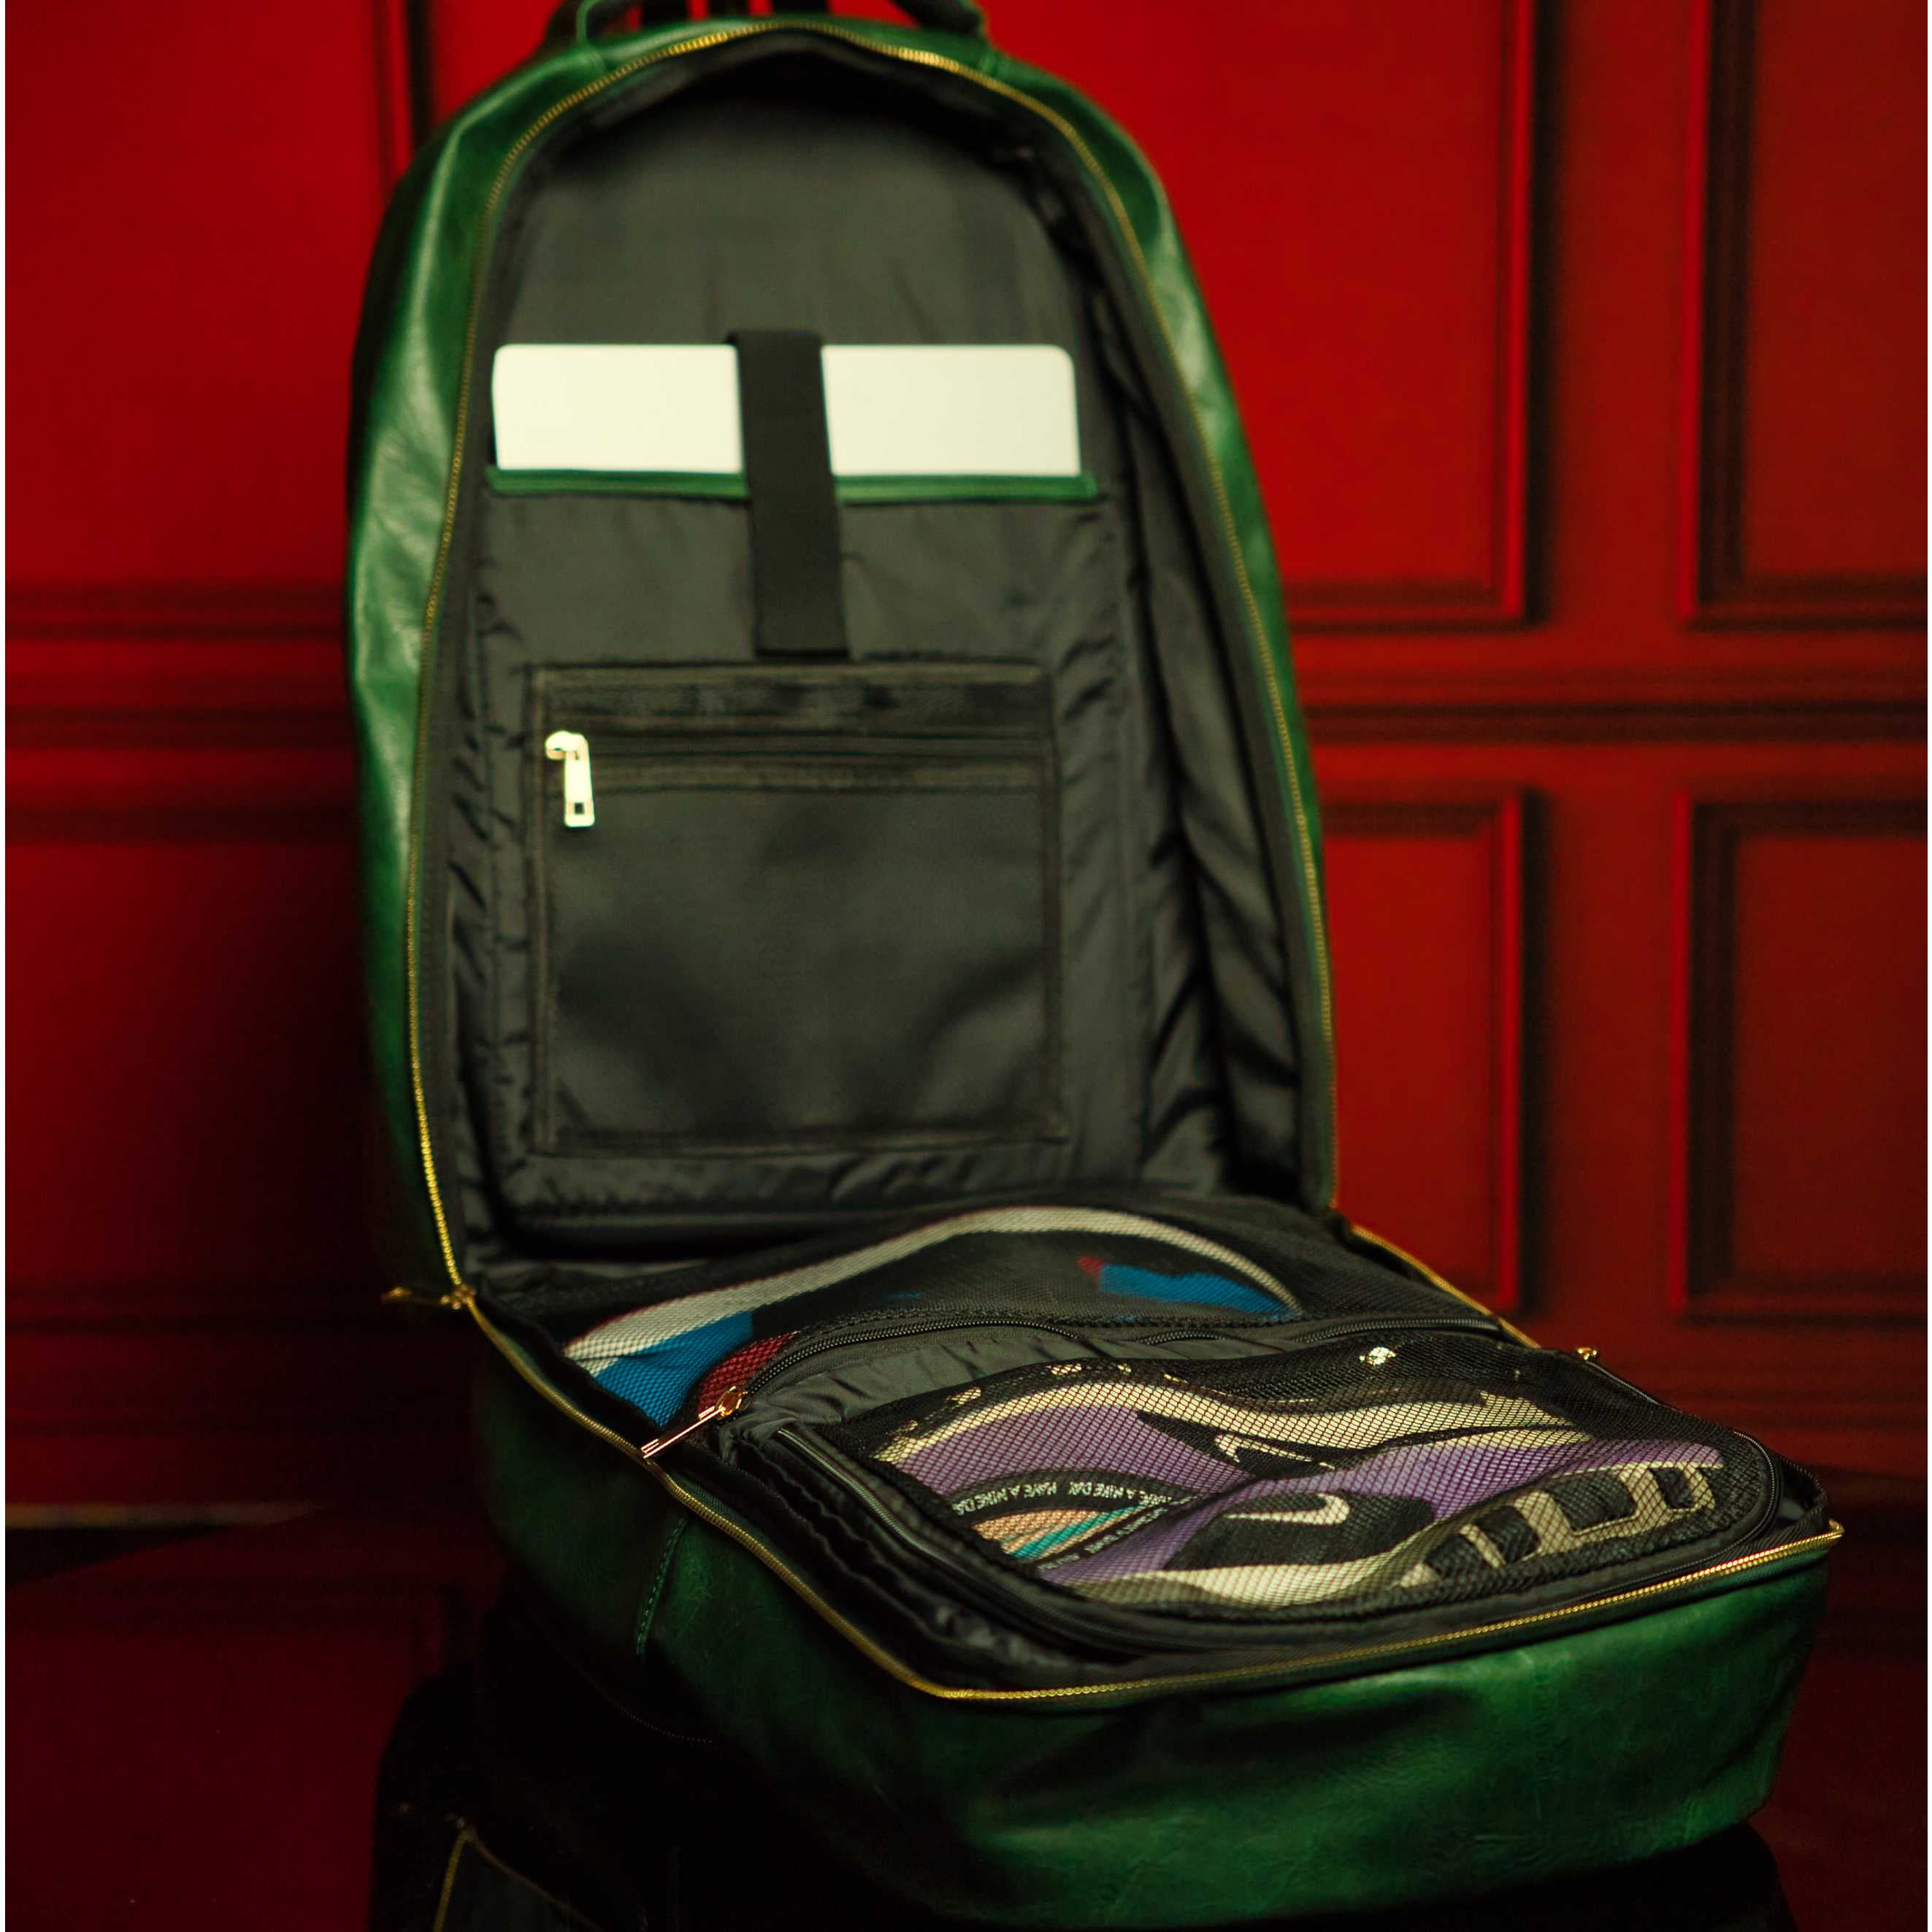 Emerald Green Tumbled Leather Commuter Bag - Sole Premise